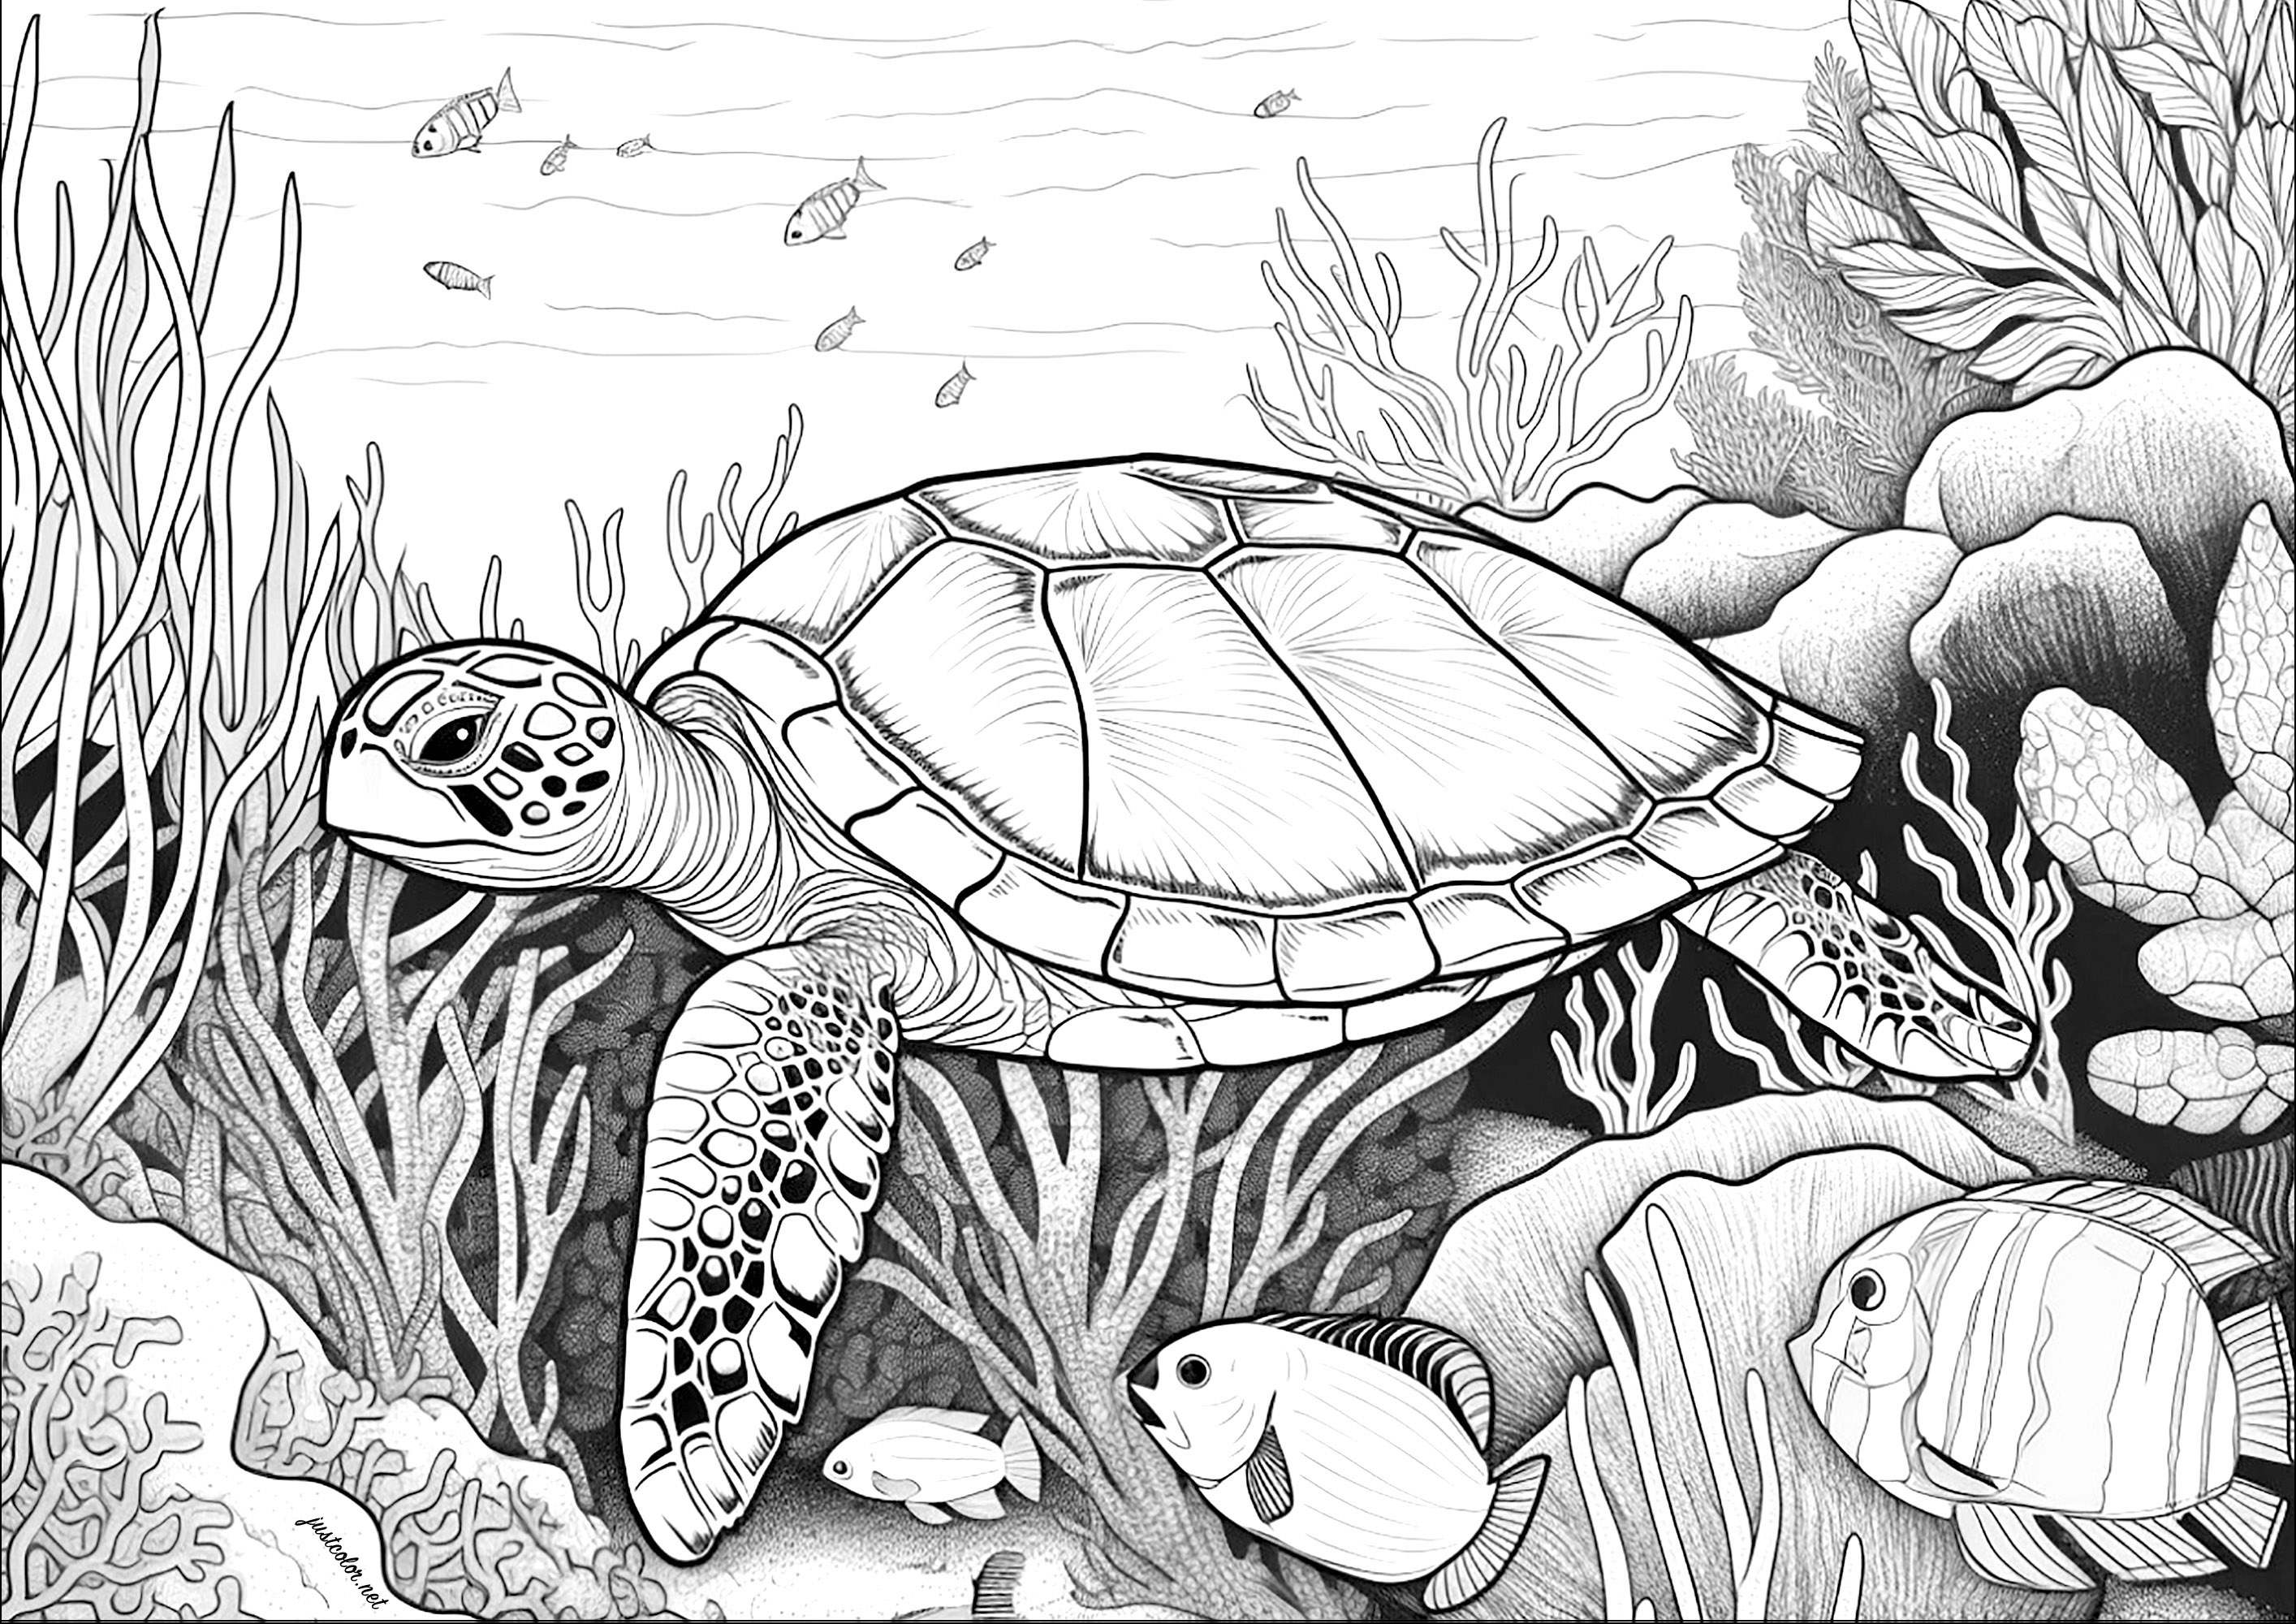 Large turtle swimming on the seabed. Colour in the pretty fish, coral and seaweed too